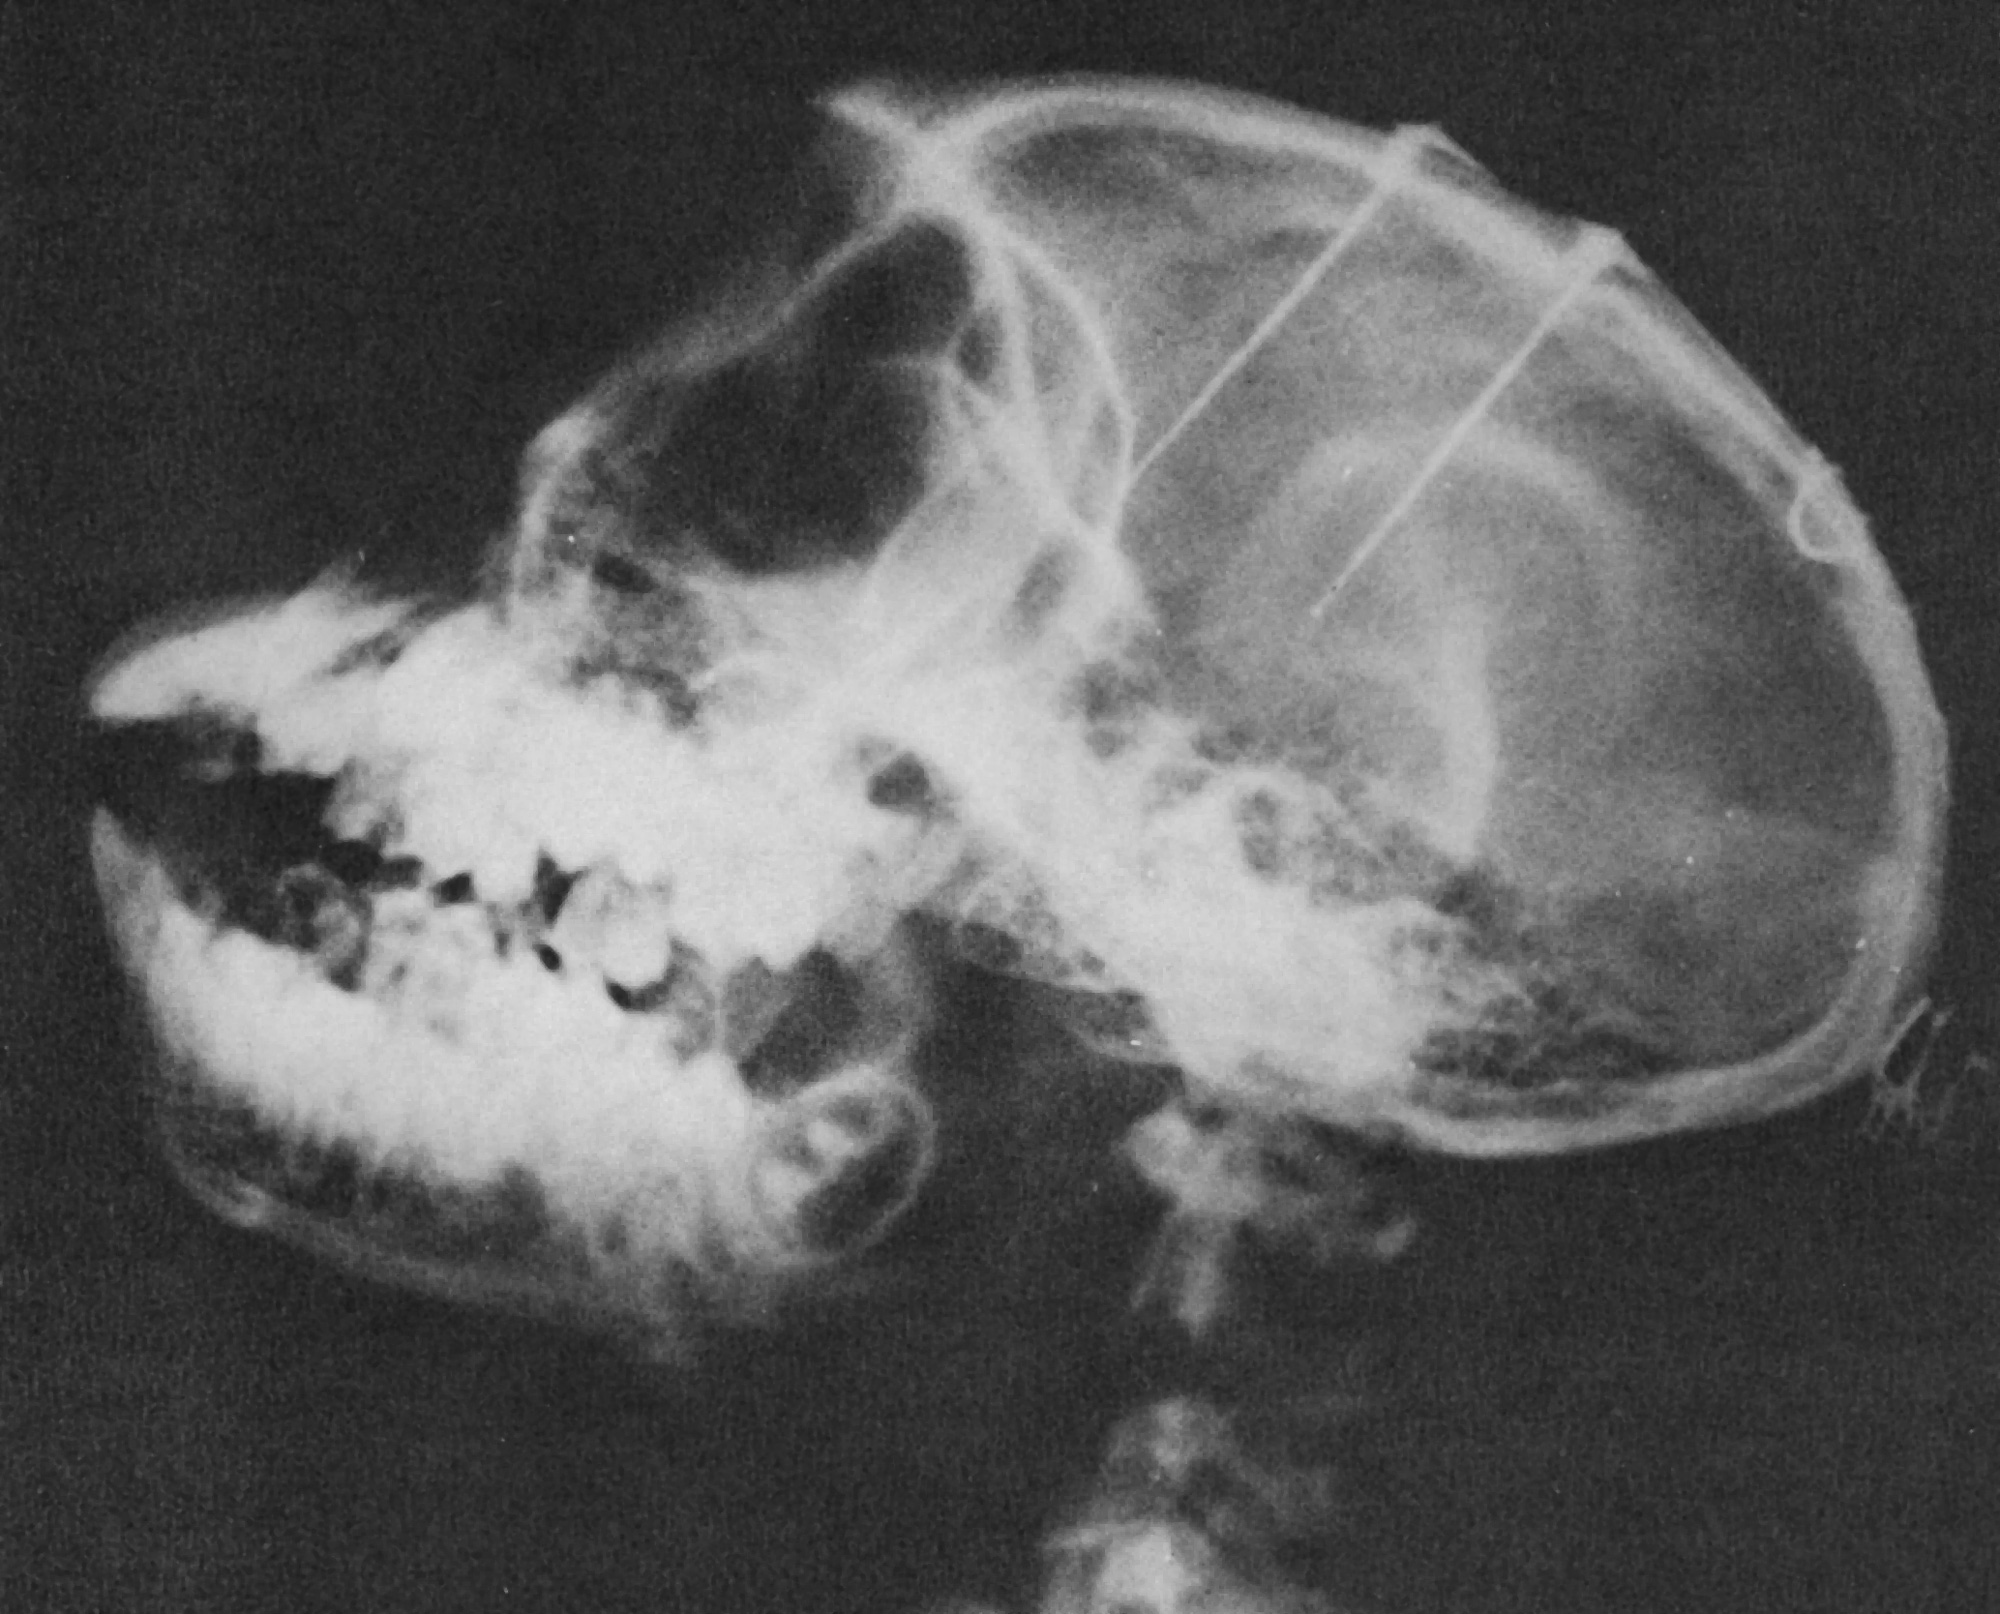 X-ray of a monkey’s head showing two assemblies of electrodes implanted in the frontal lobes and in the thalamus. Photo taken from Delgado’s book Physical Control of the Mind.